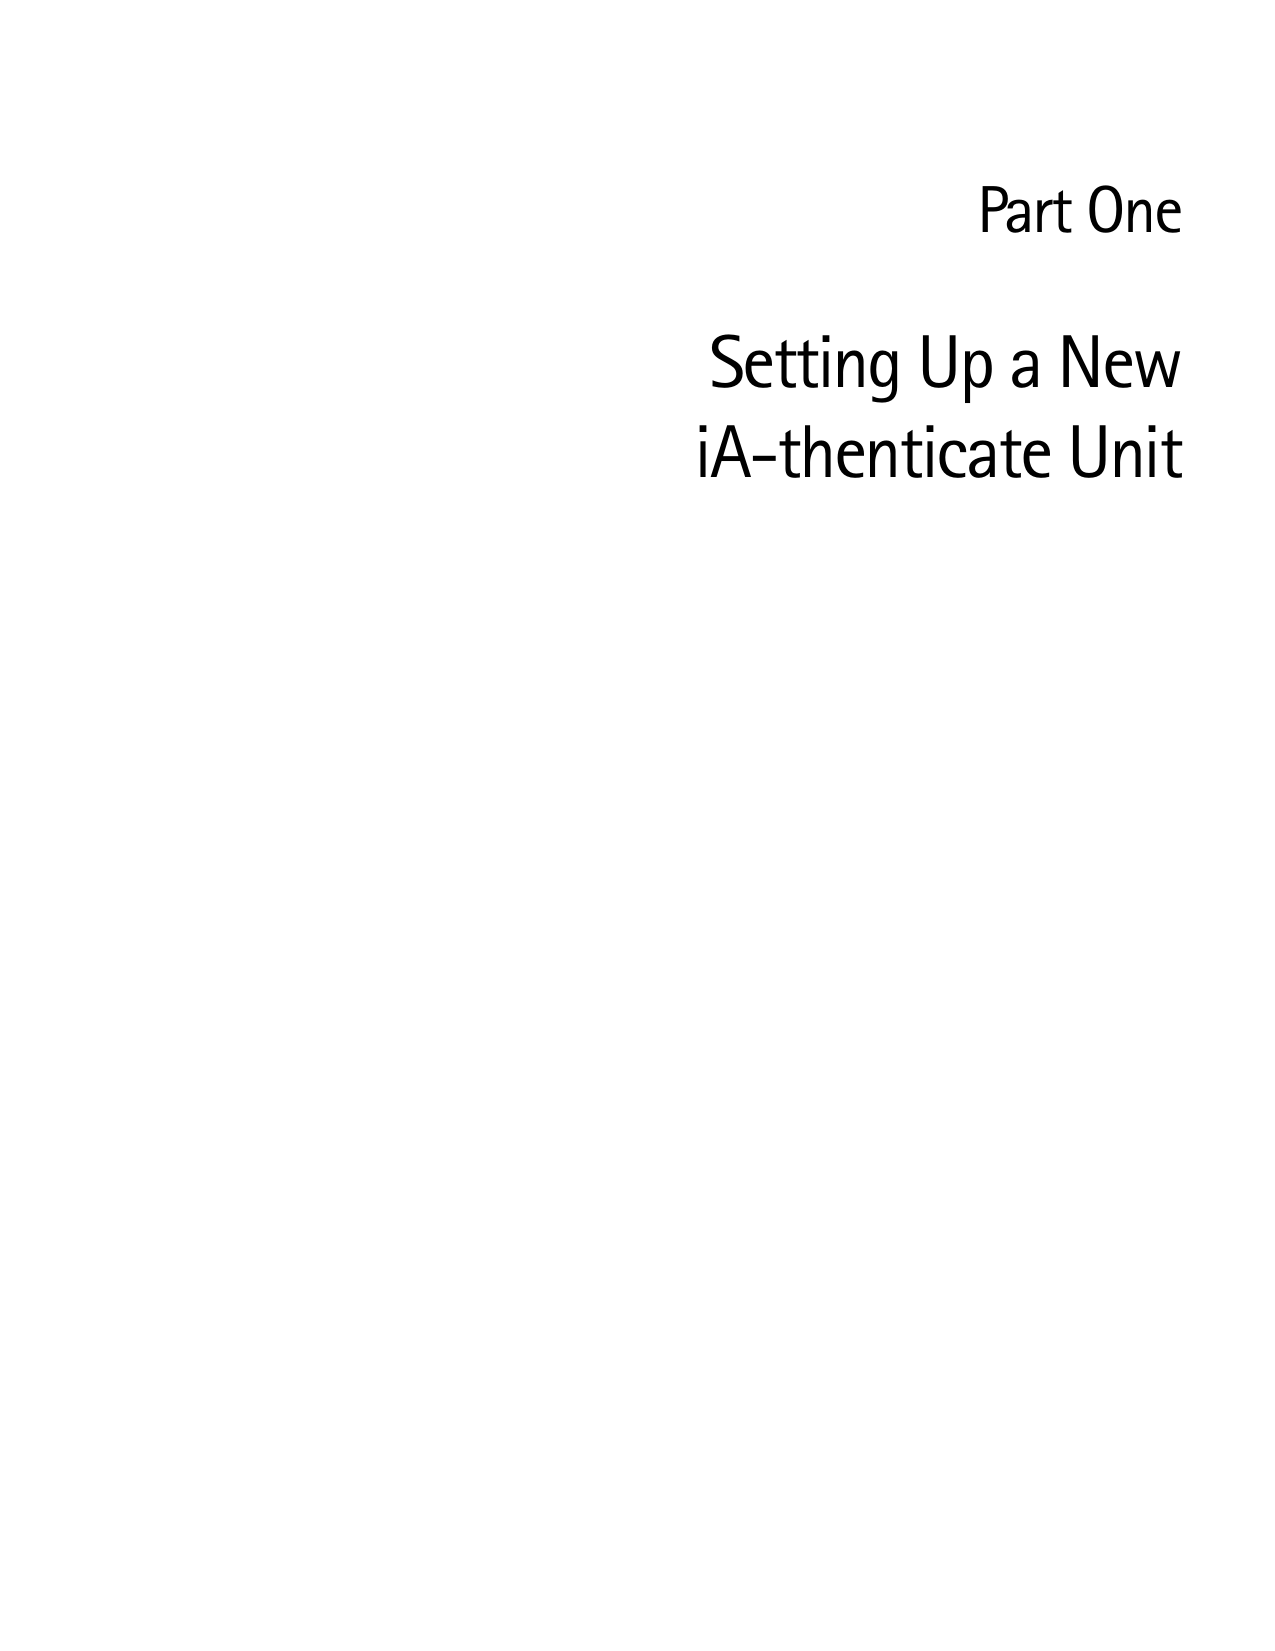 Part OneSetting Up a NewiA-thenticate Unit